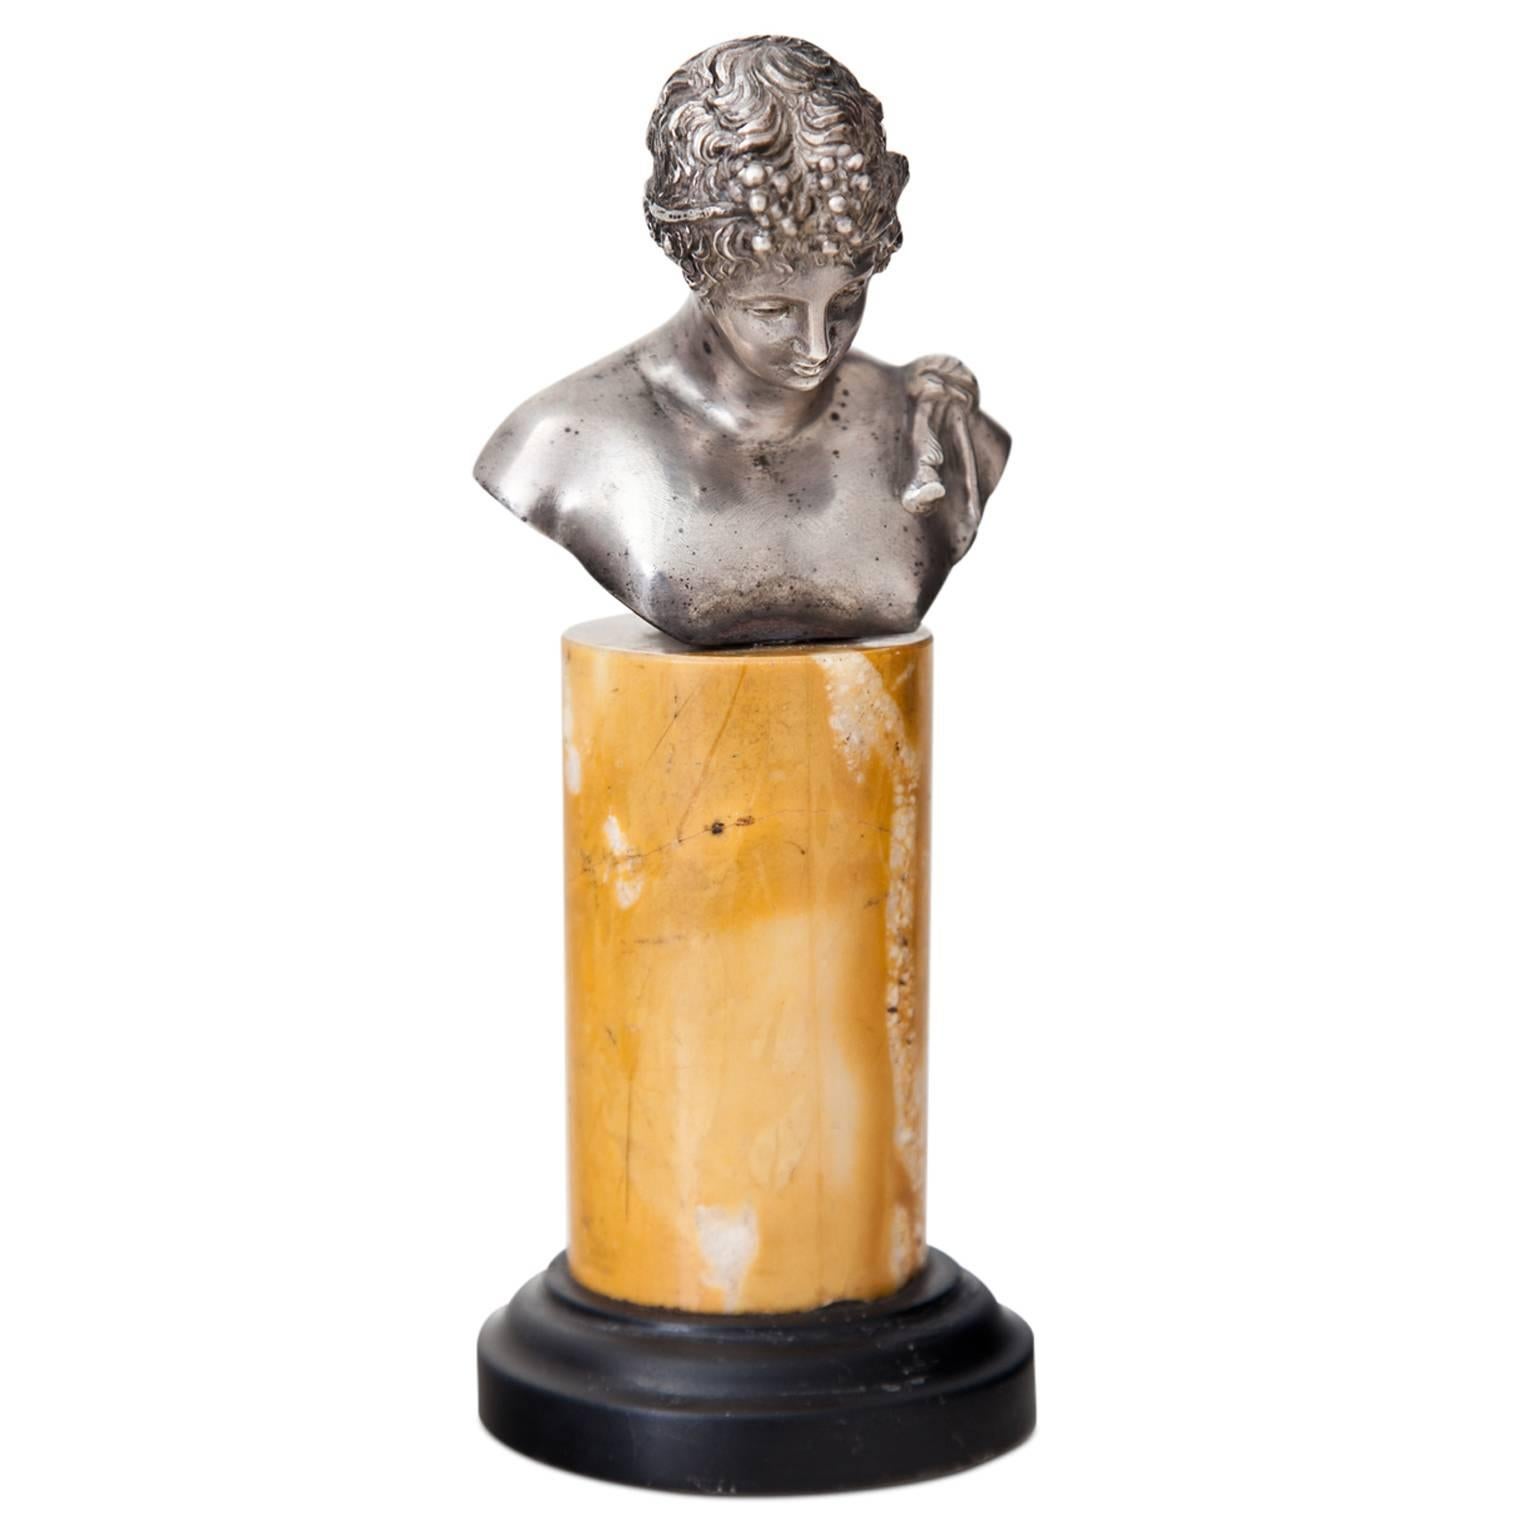 Small bust of Dionysus, so-called Narcissus of Pompeii on cylindrical yellow marble pedestal with a black base.